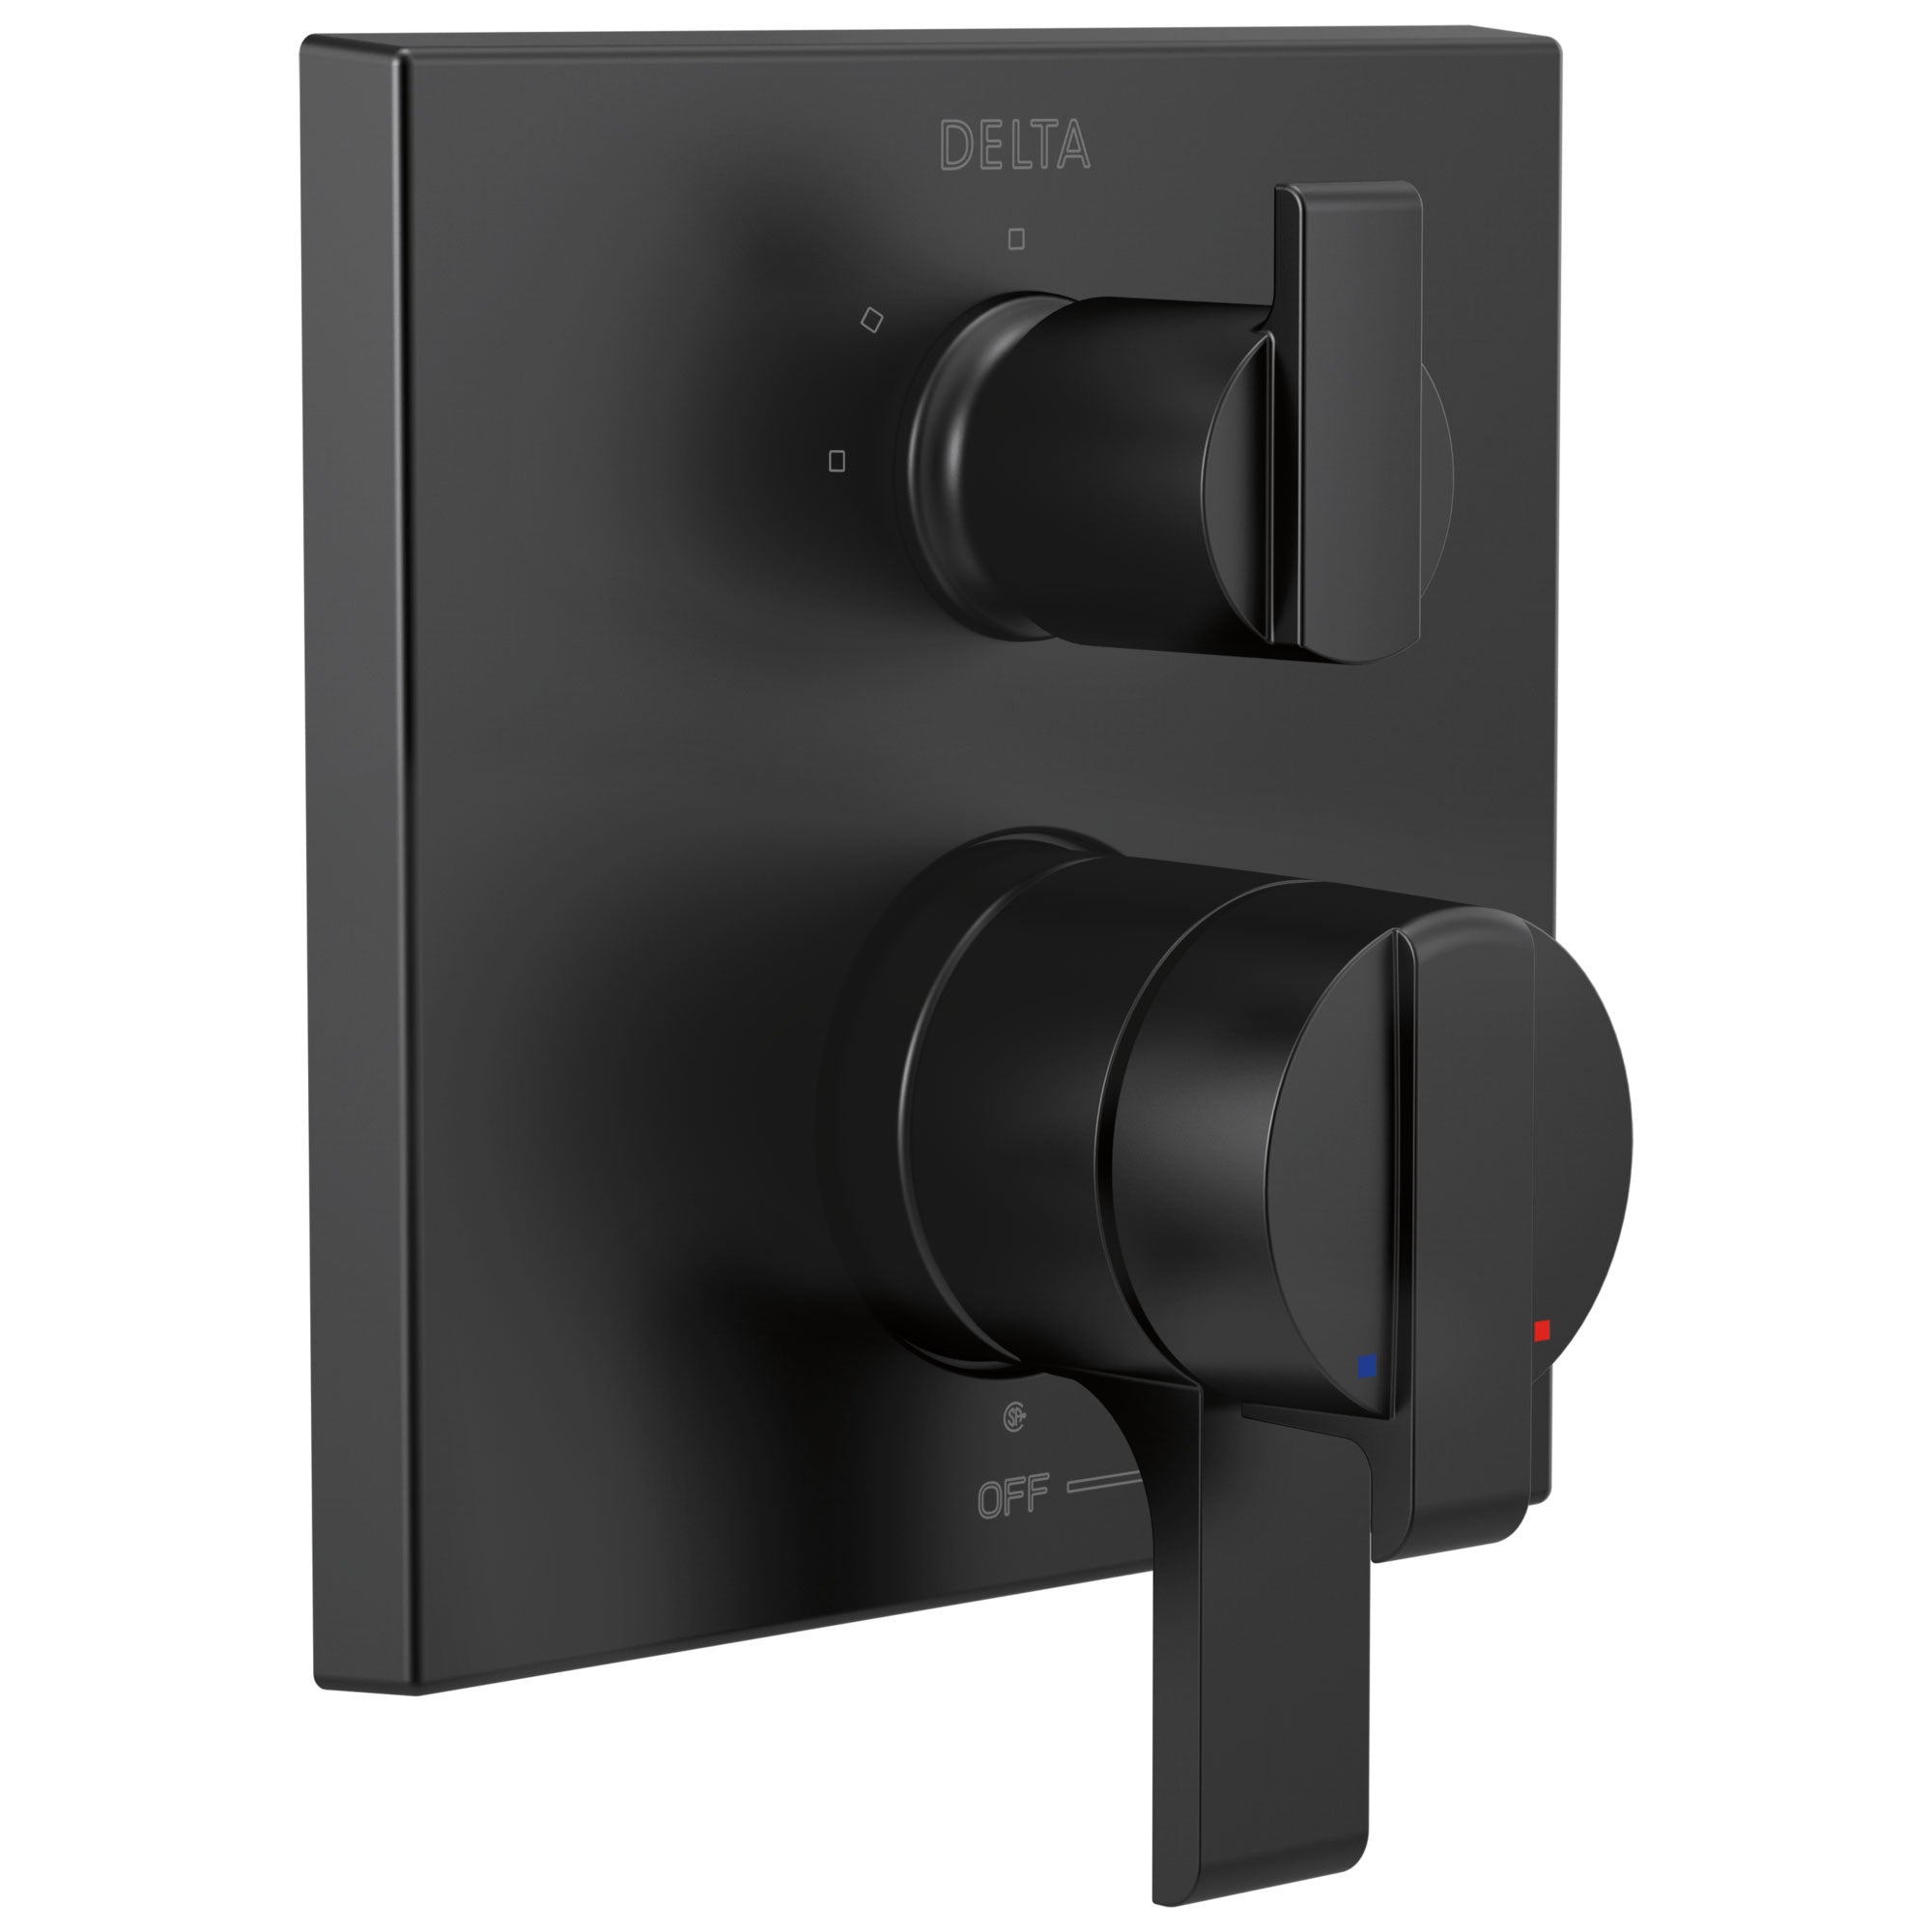 Delta Ara Matte Black Finish Angular Modern 17 Series Shower Faucet Control with 3-Setting Integrated Diverter Includes Valve and Handles D3152V